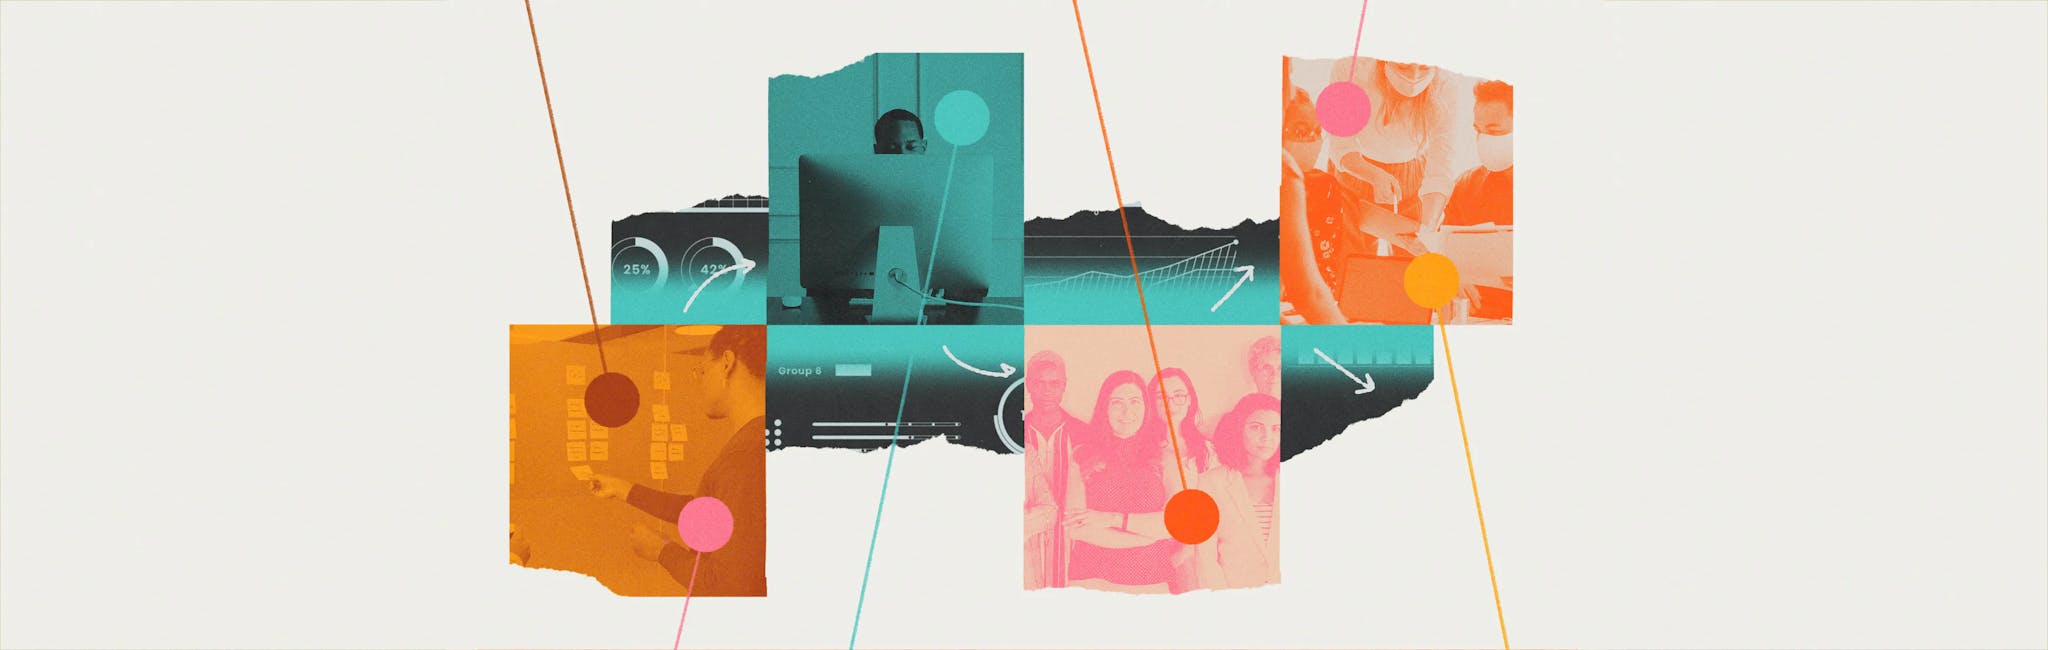 Pink, orange, and sea green photos show people in different stages of the unemployment experience, from waiting in lines to filling out forms, and people working to create a new experience. The photos are connected and intersected by sea green, orange, and pink lines.